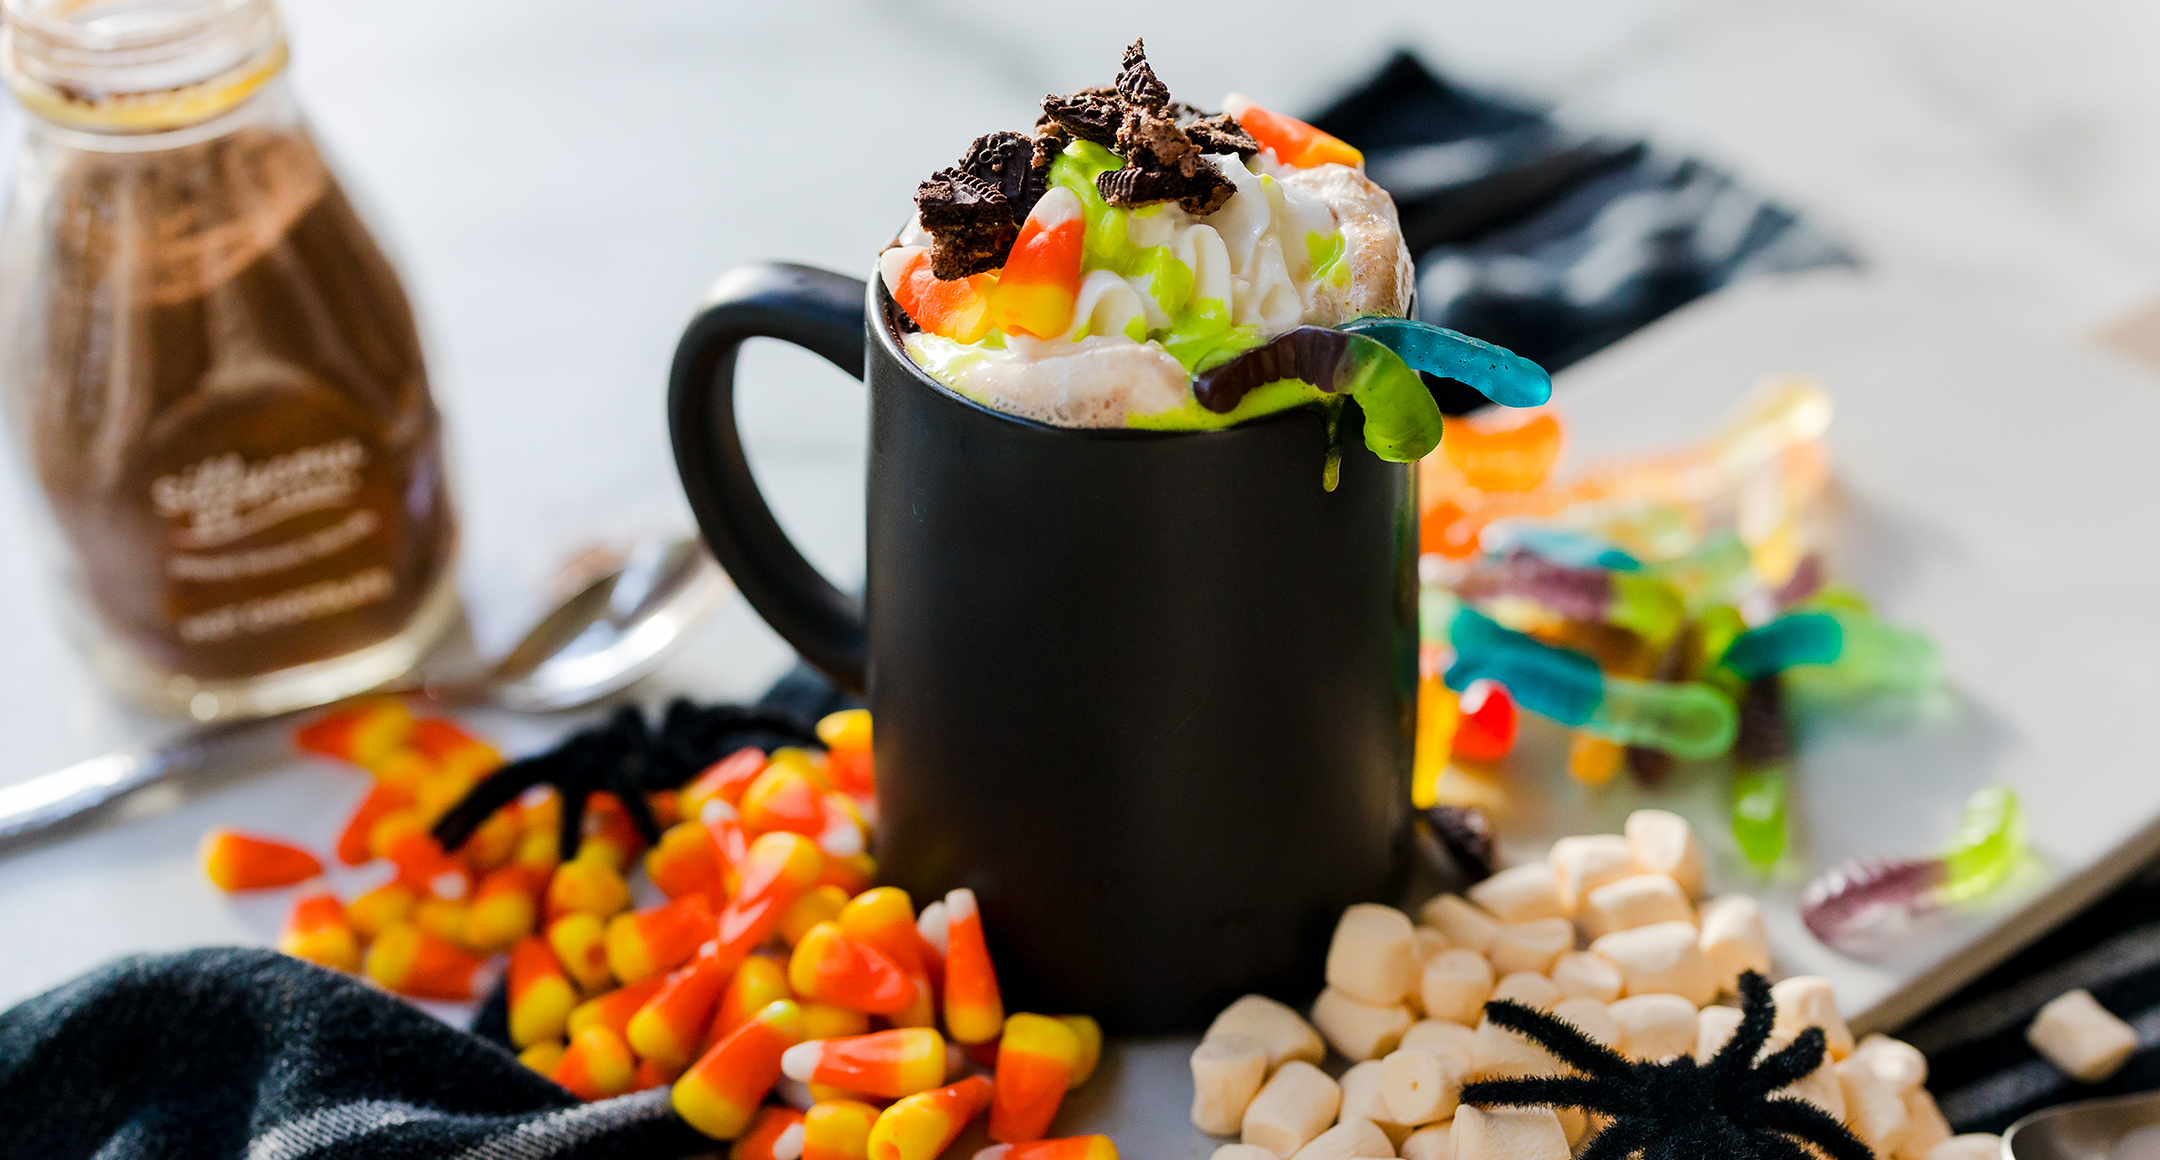 A black mug filled with hot chocolate and topped with festive green whipped cream, gummy worms, candy corn, and marshmallows.